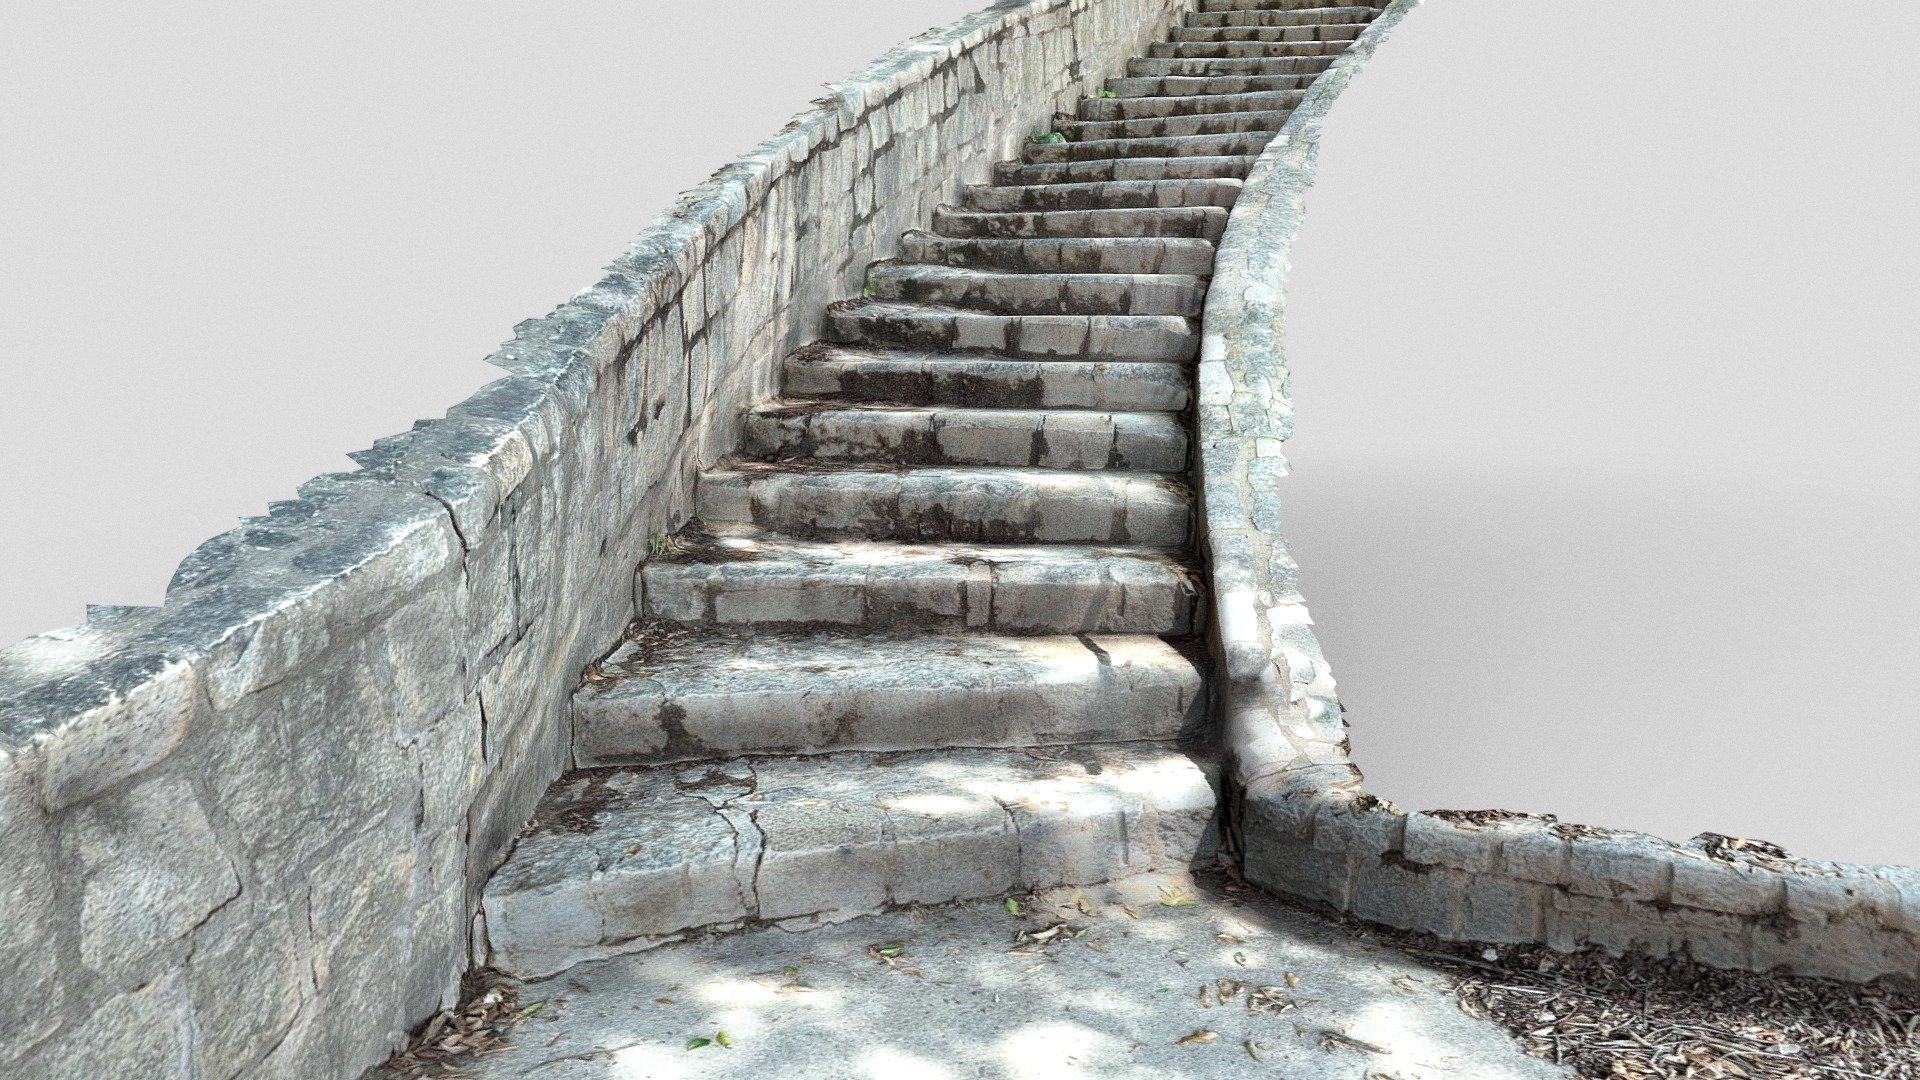 3D scan of Stone stair in park. Ready for your landscape models in UE5 lumen and nanite 3d model